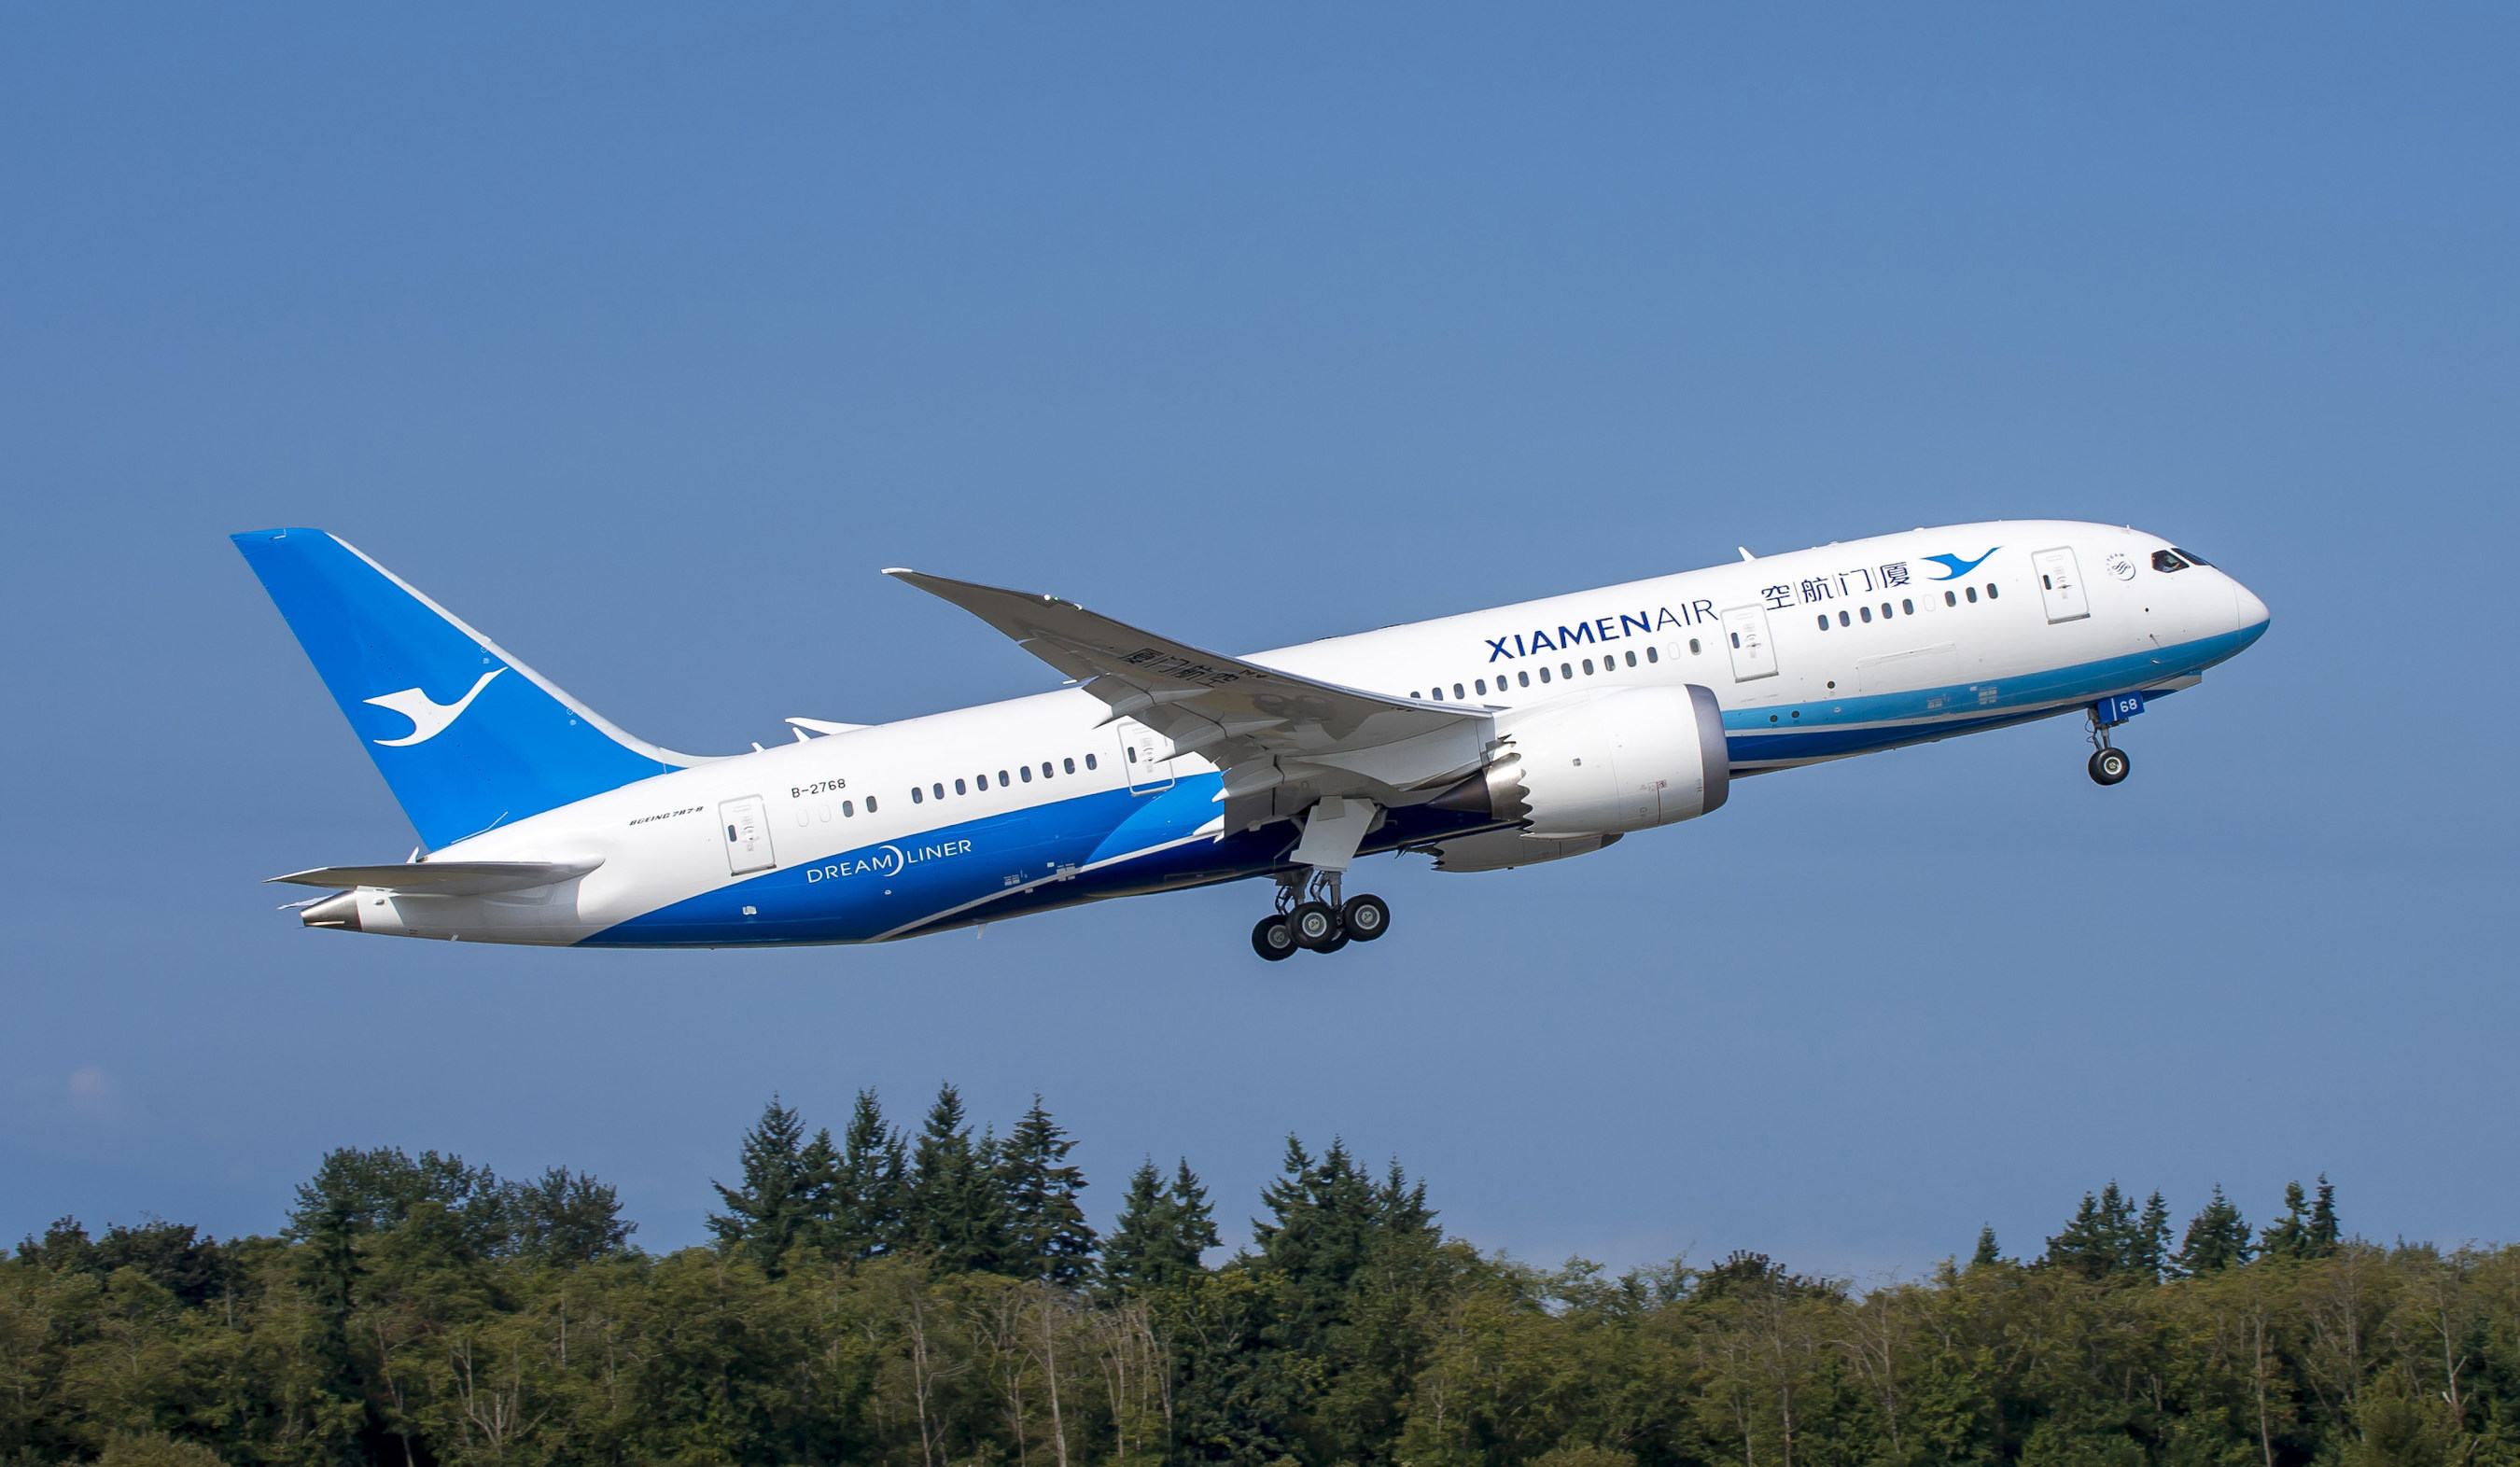 On July 26, Xiamen Airlines officially launched the Xiamen-Amsterdam route.